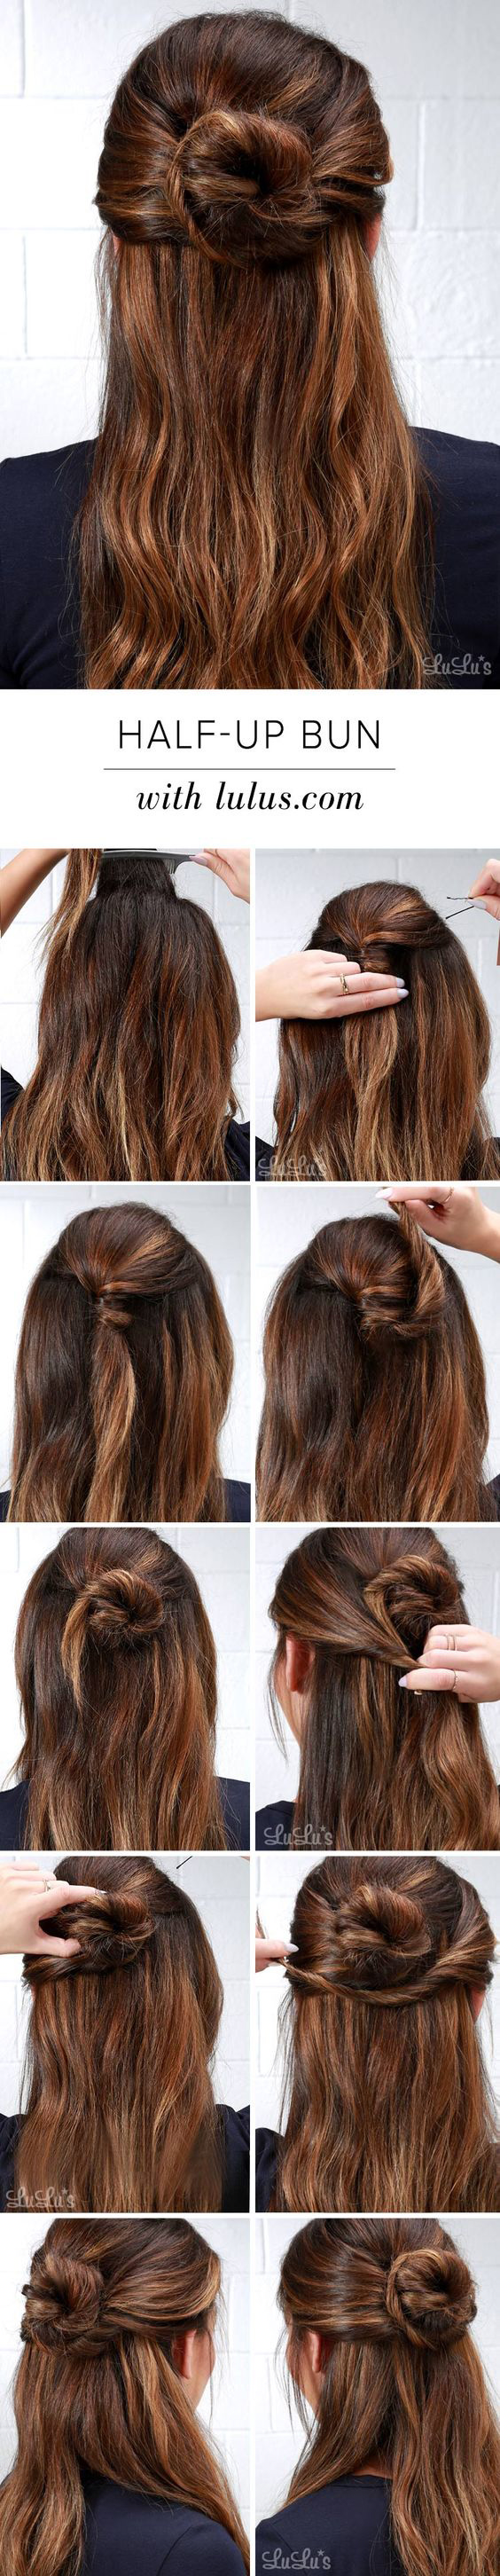 12-cute-and-easy-hairstyles-that-can-be-done-in-a-few-minutes